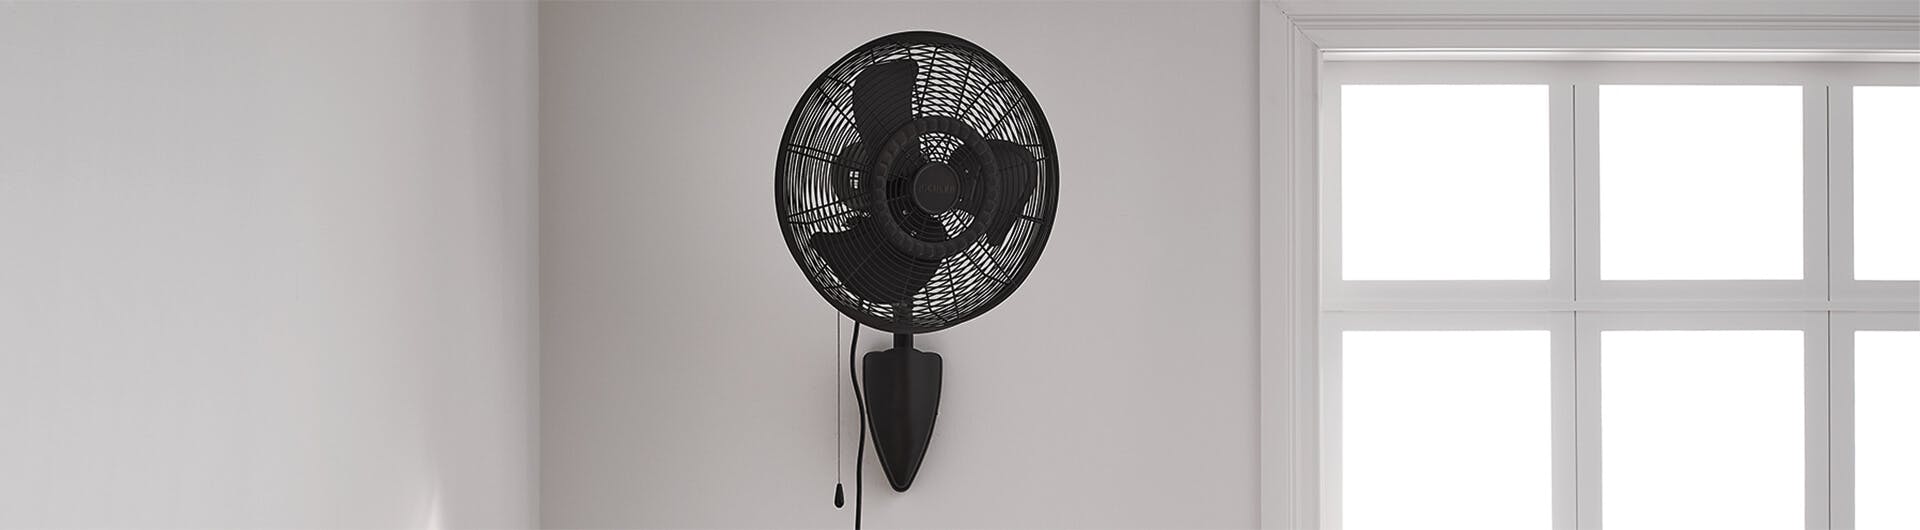 Pola wall fan in natural bronze mounted next to a daylit bedroom window